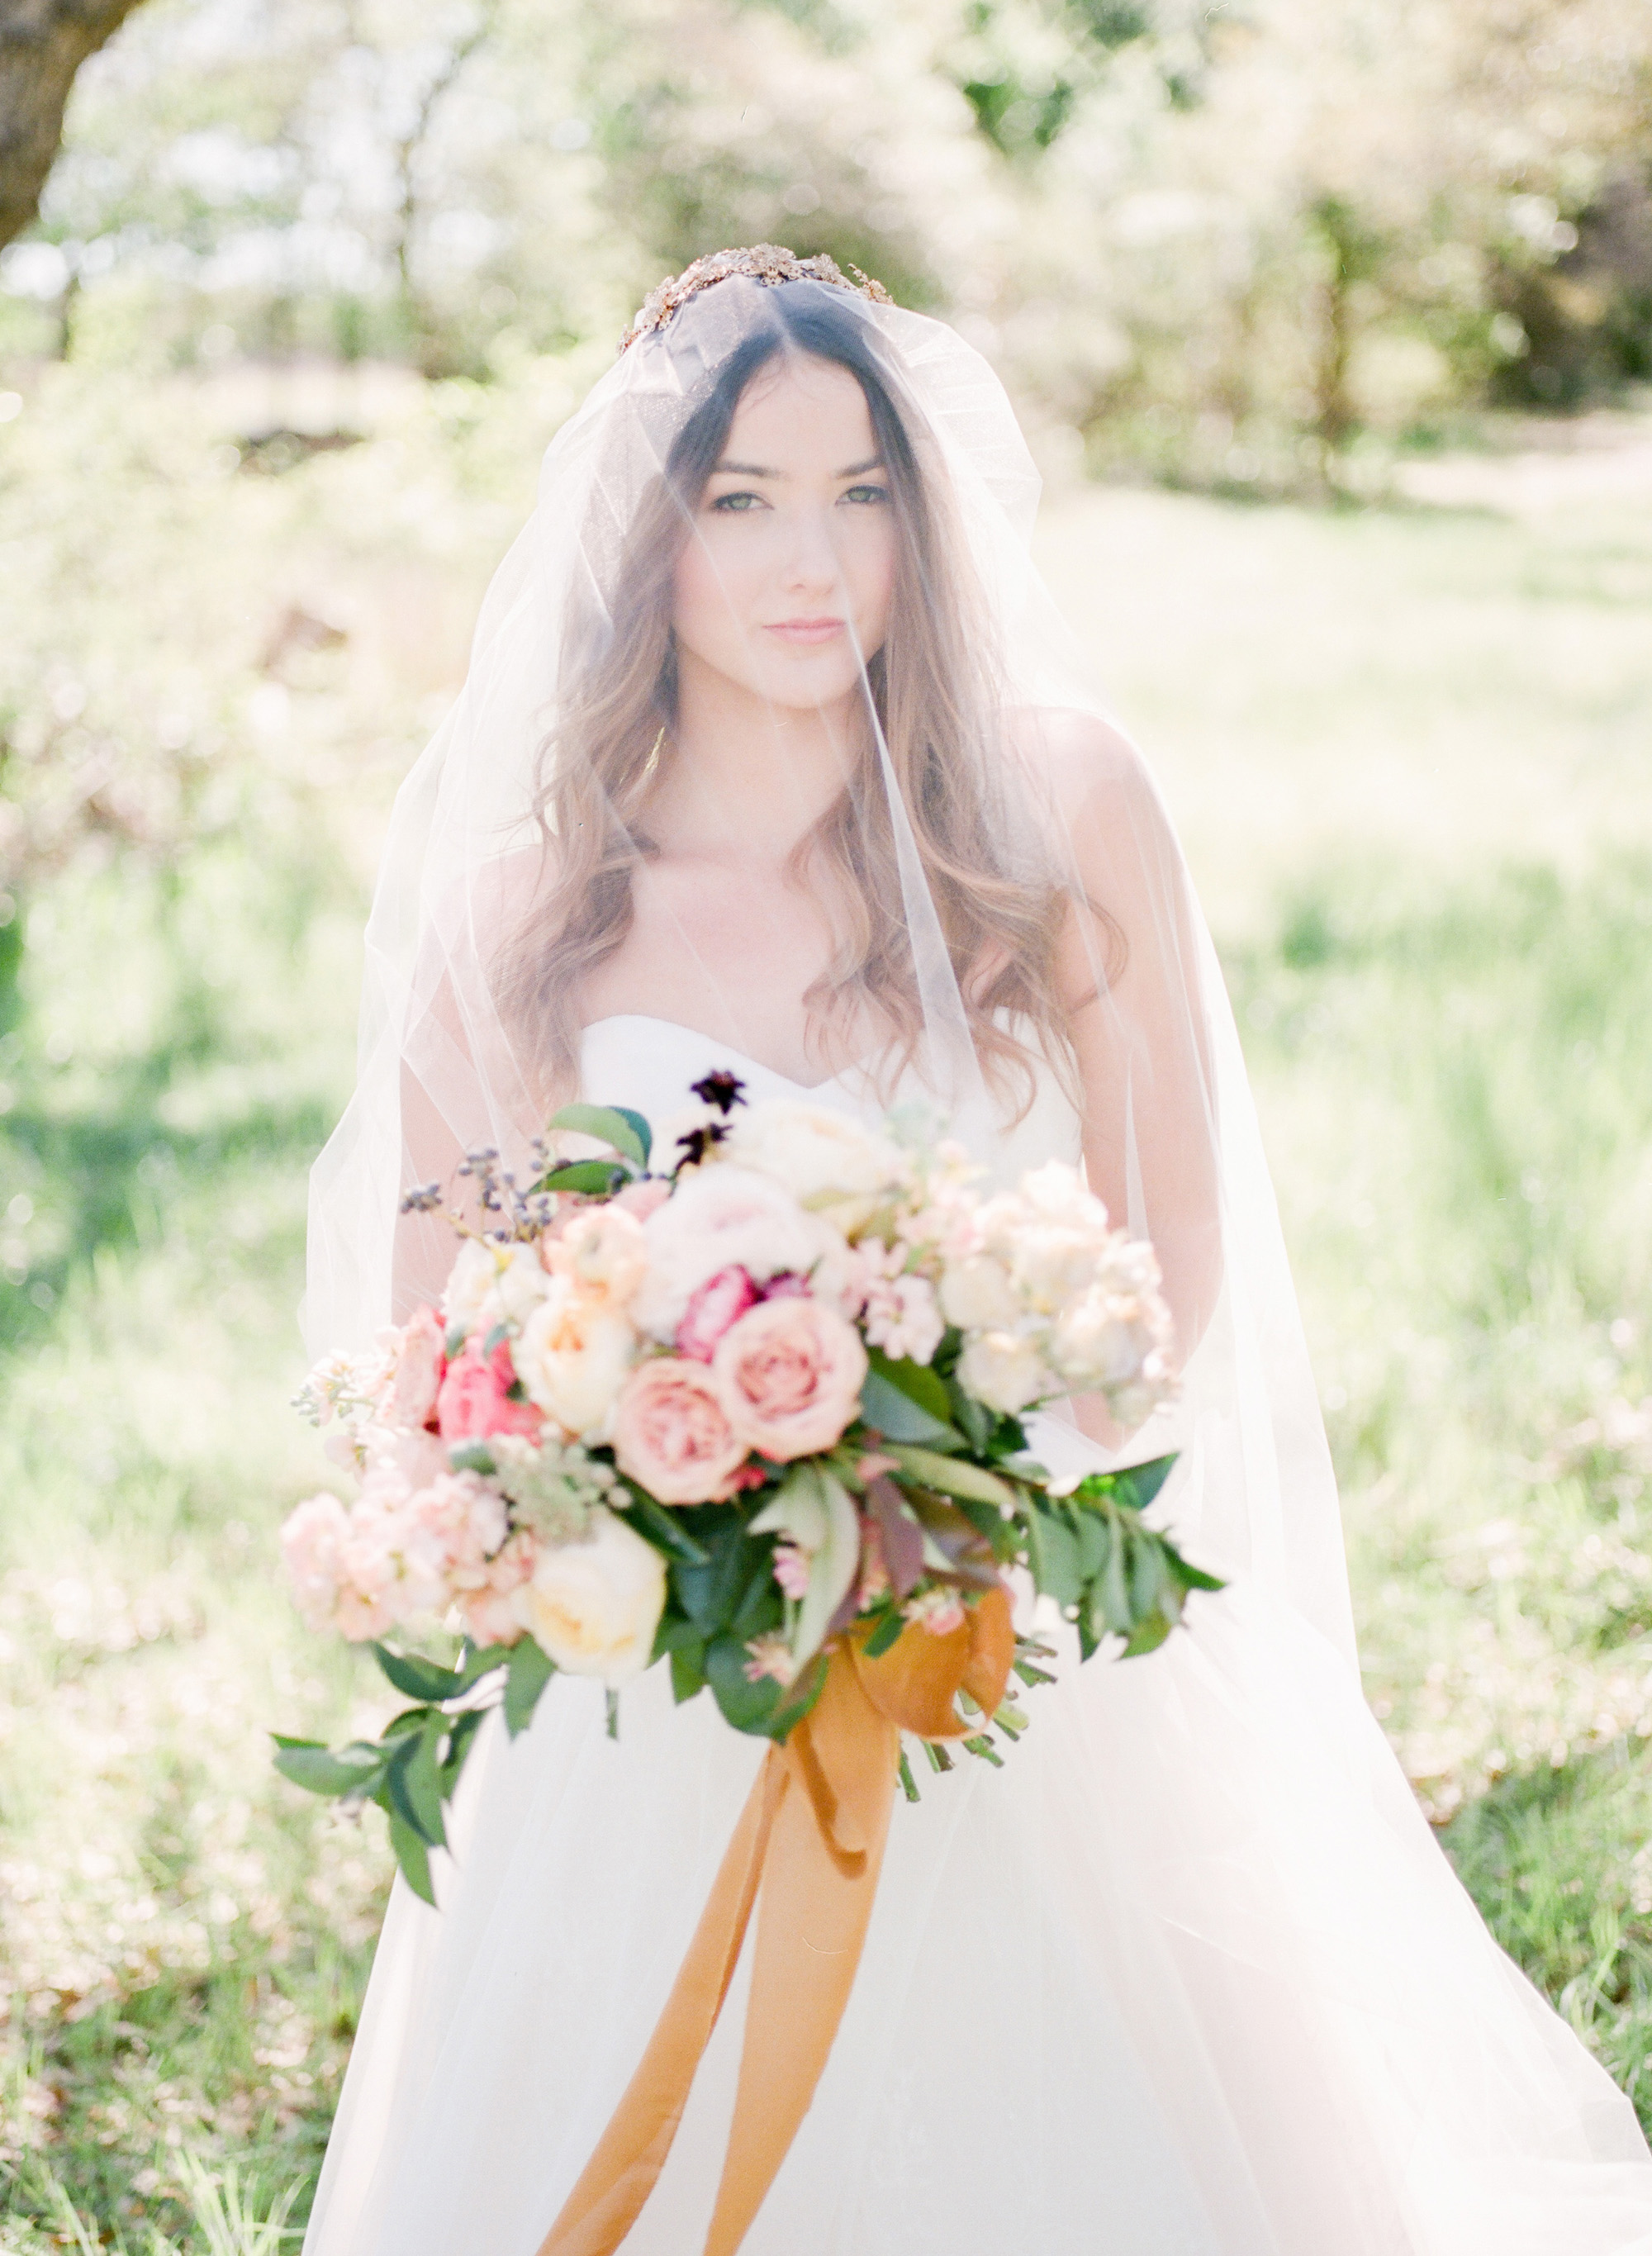 Beautiful Dallas bride captured by Texas wedding photographer Tenth & Grace.